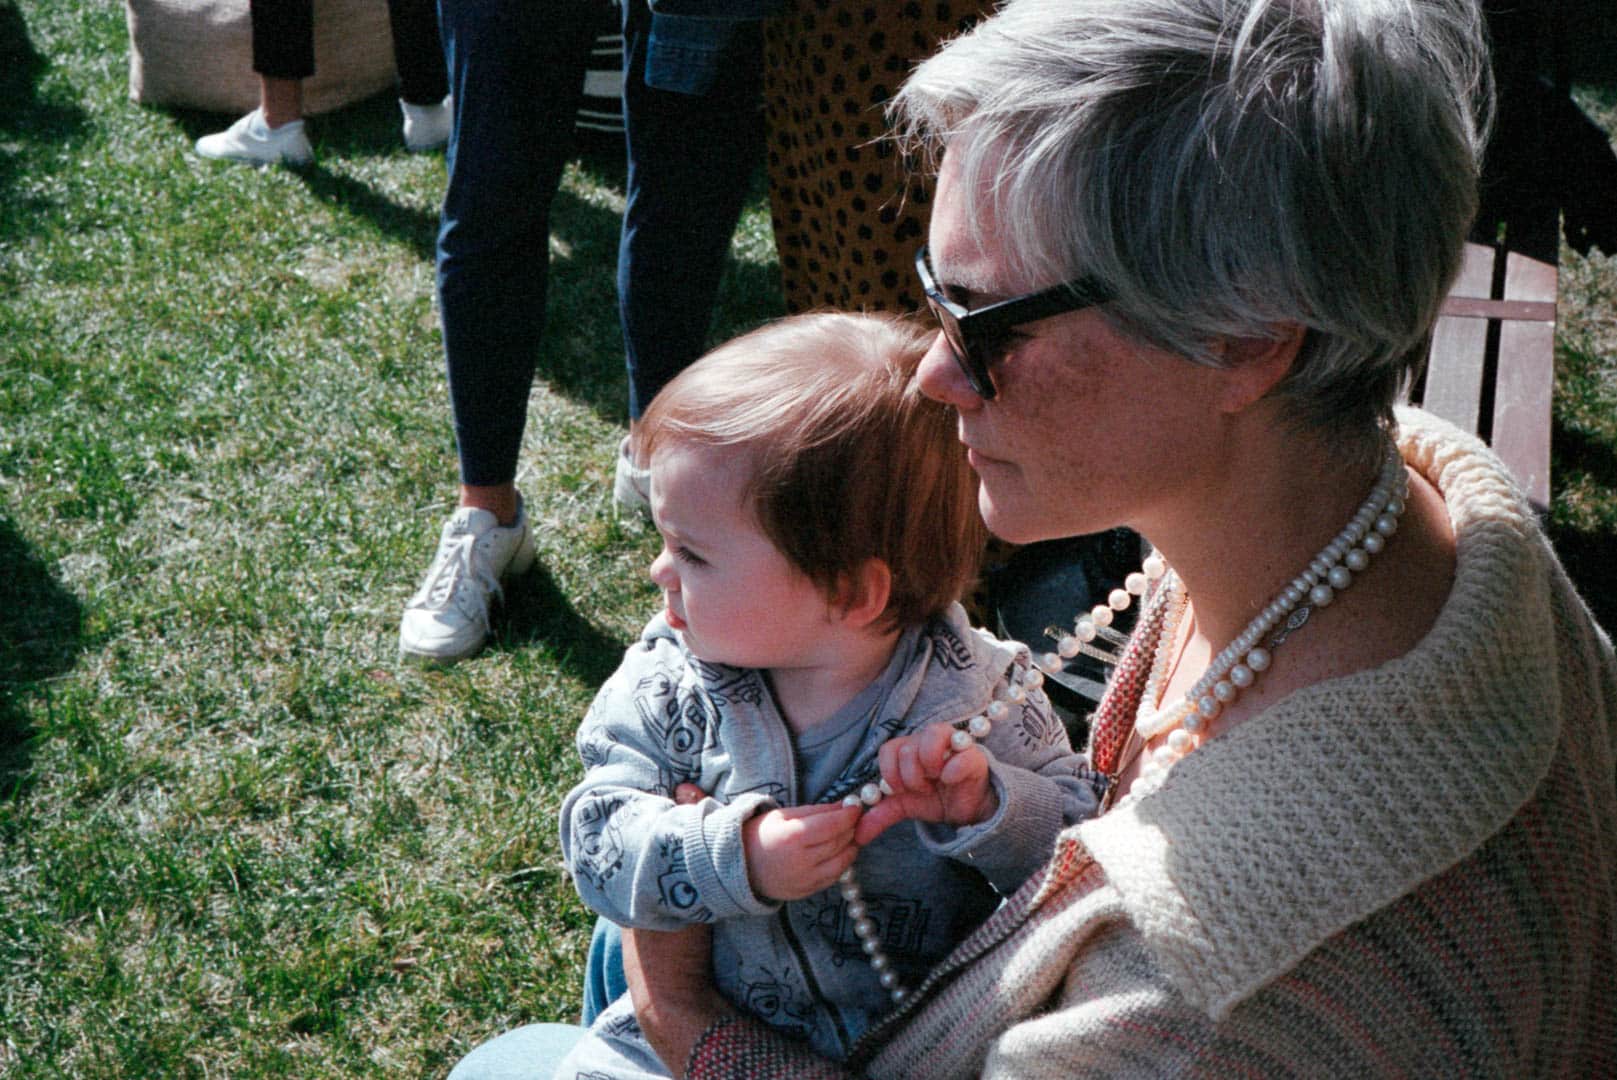 A woman and a baby sitting at a garden party